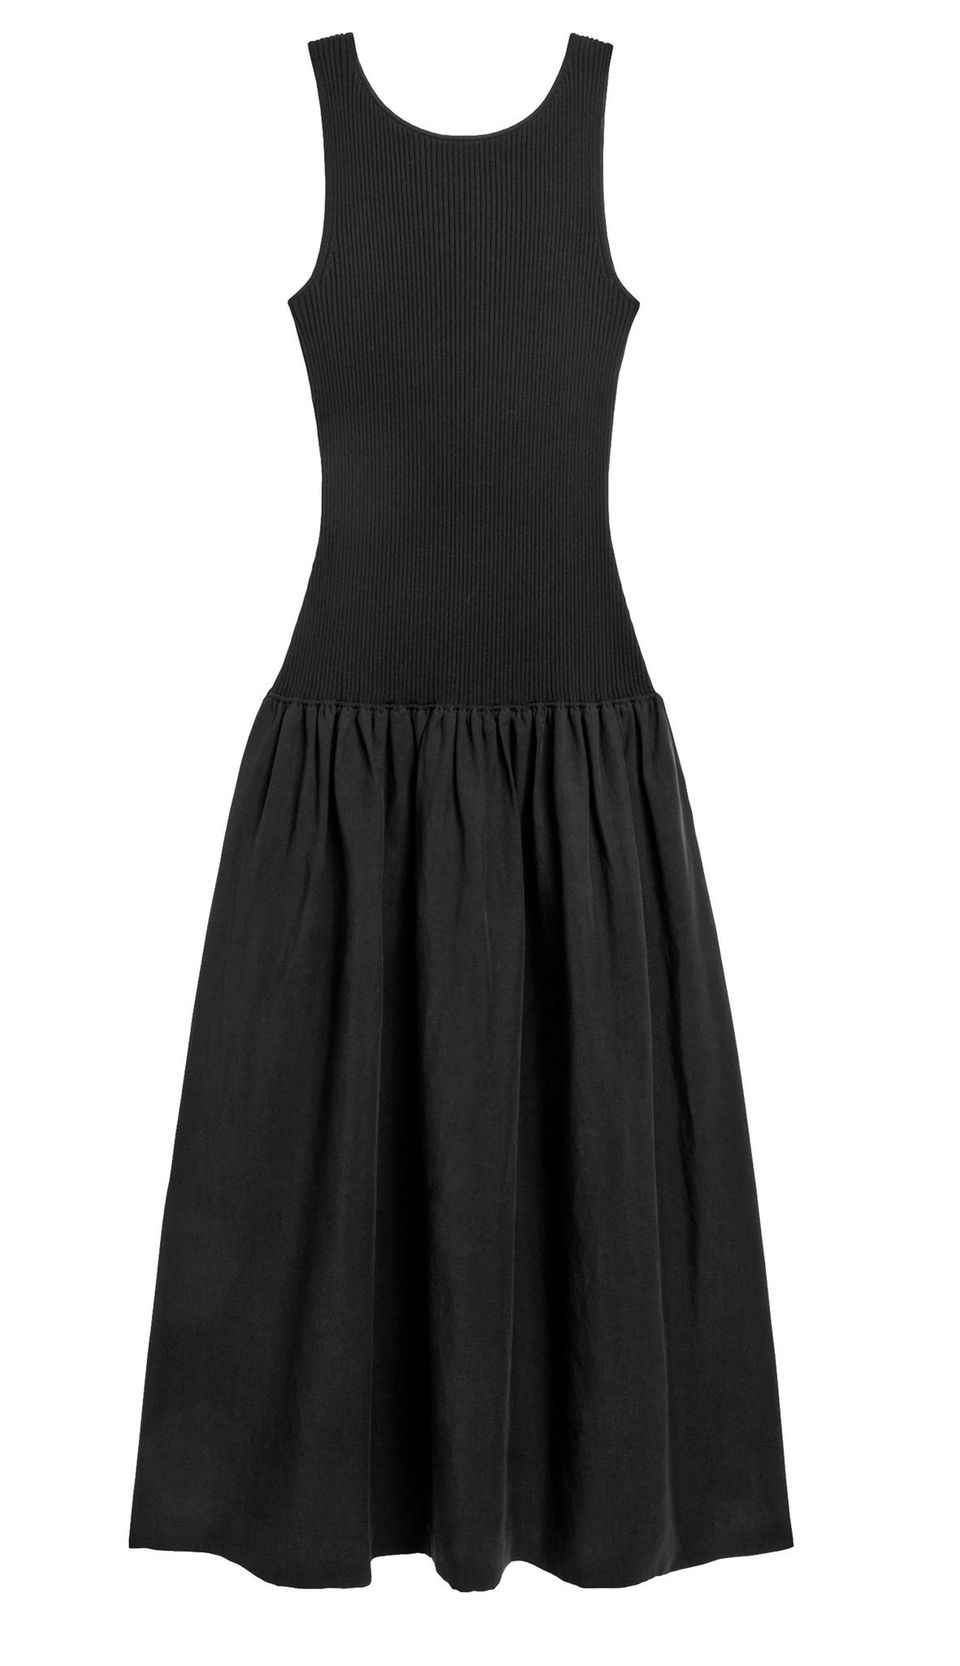 Find your own style: black dress